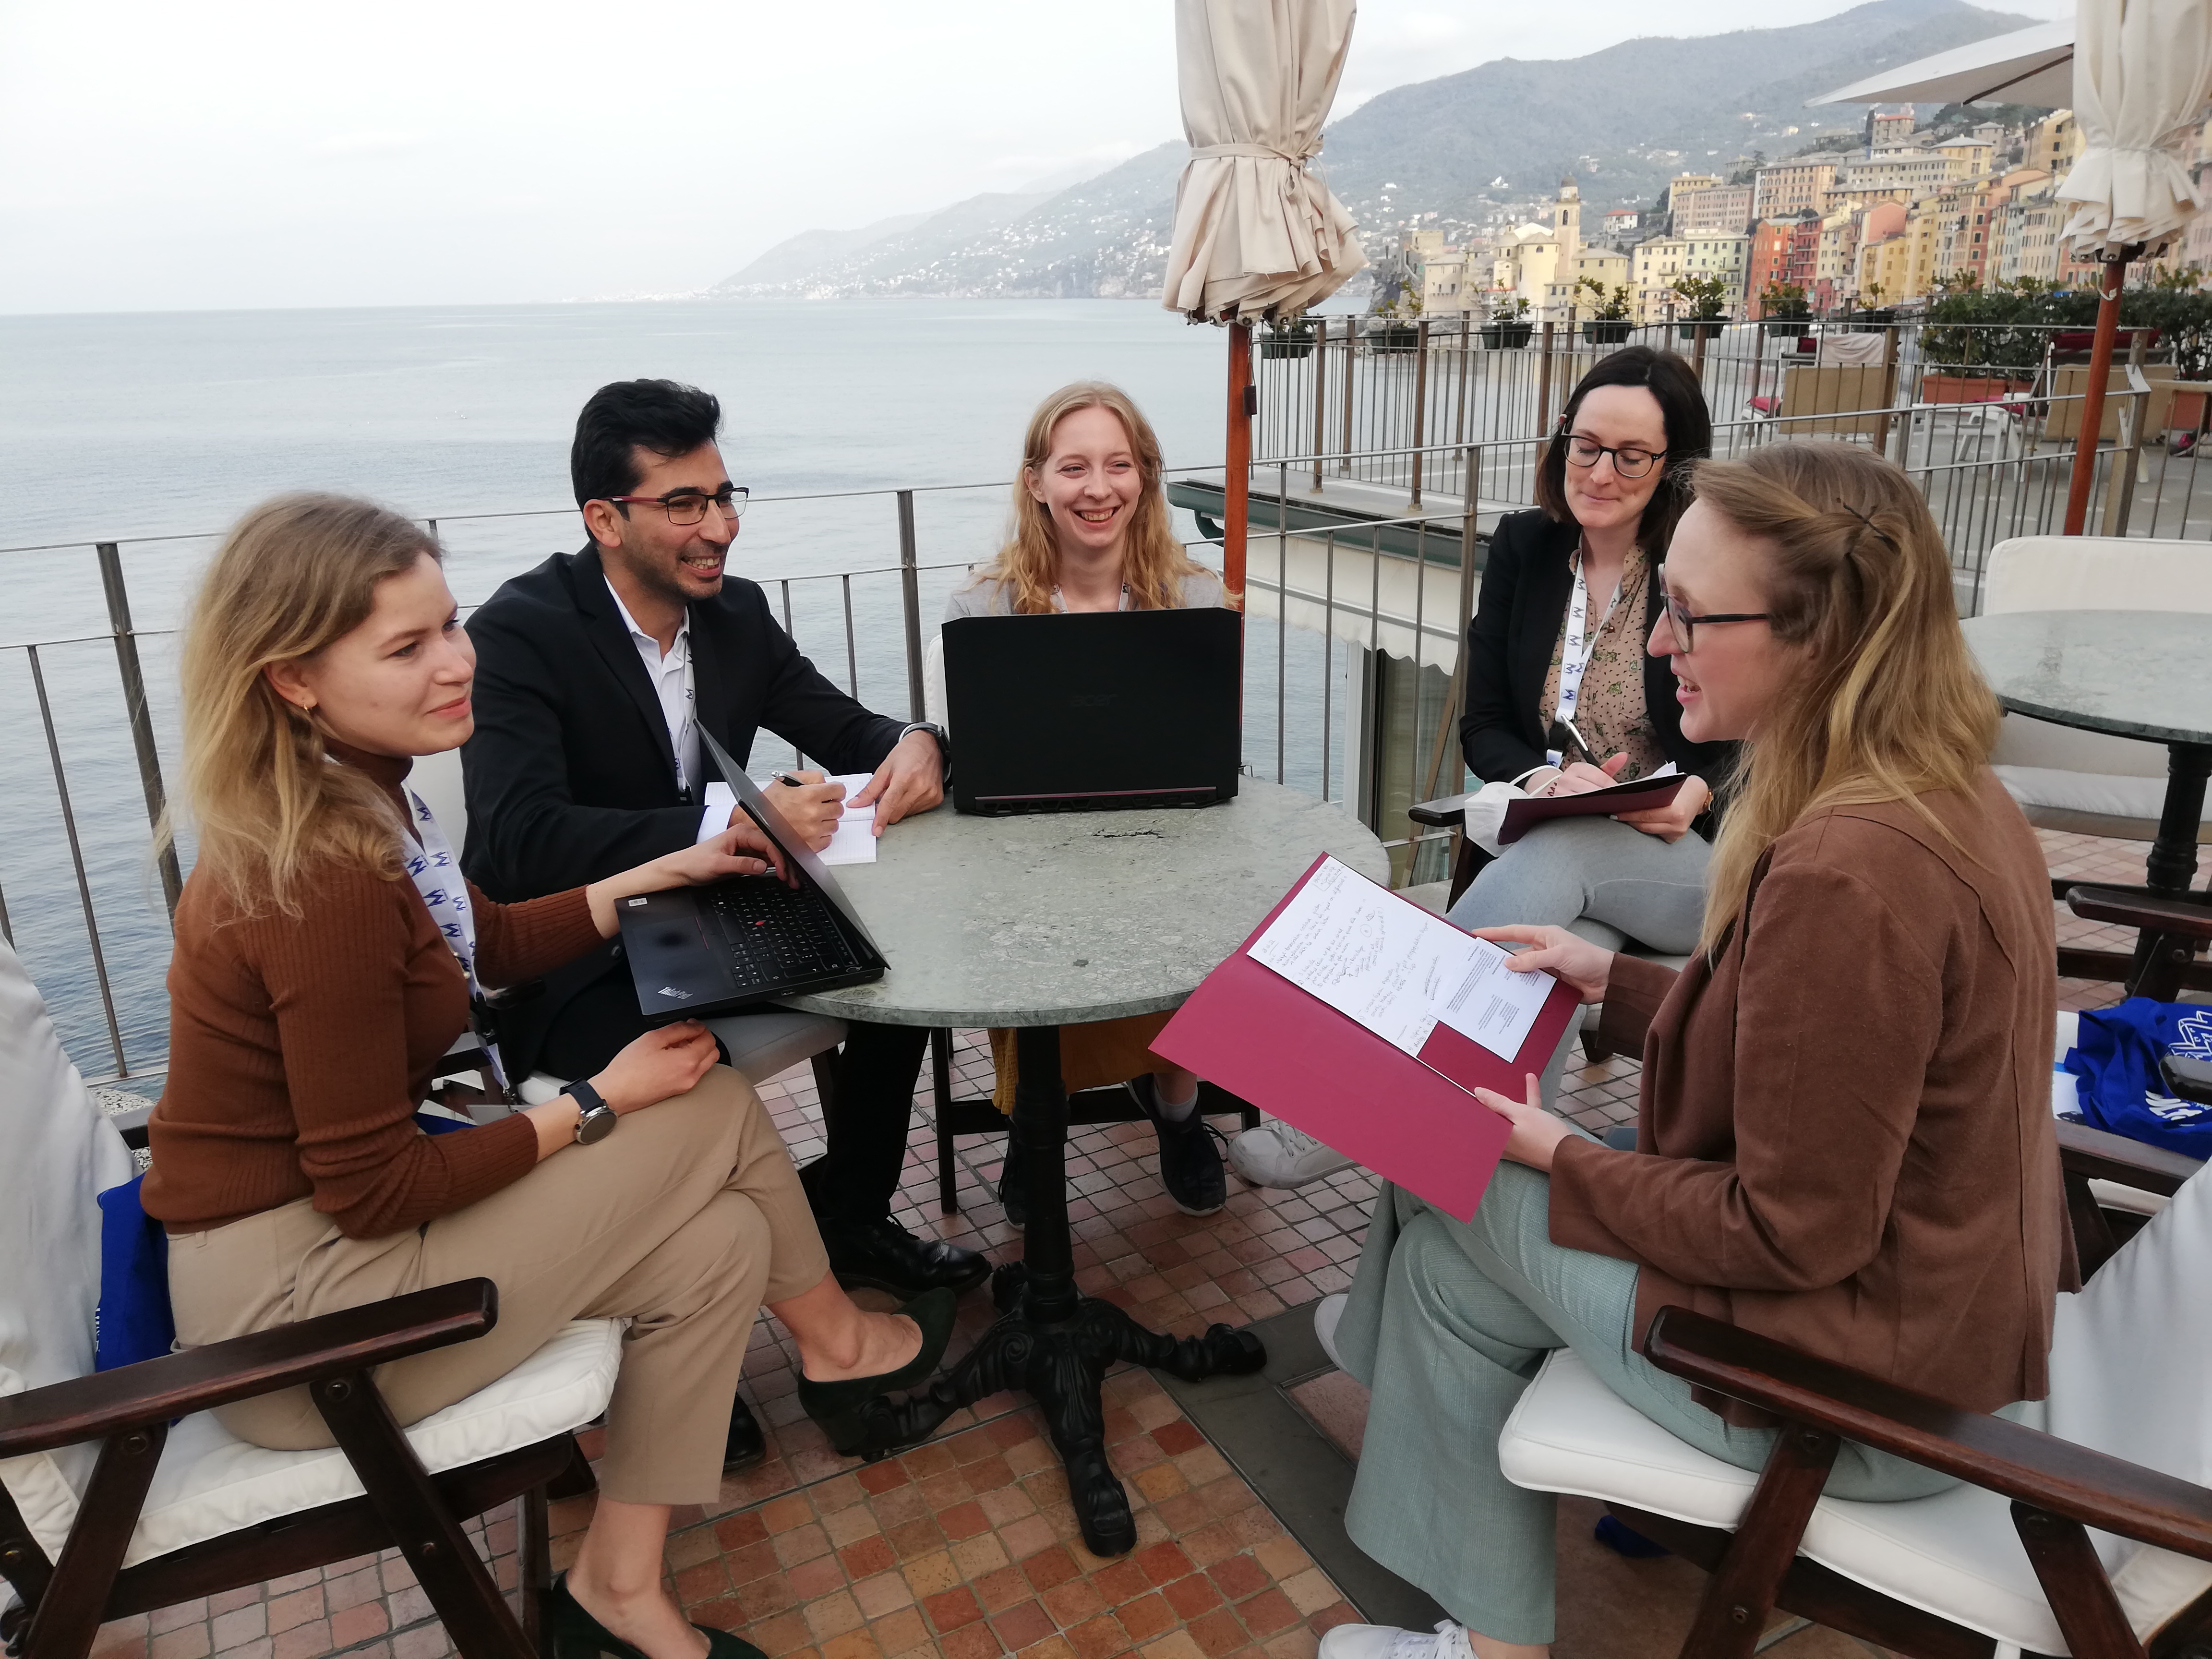 The N4M Young Scientist Award team (from left to right: Aleksandra Kozyrina, Ramin Nasehi, Jana Schieren, Pauline Eichstedt, Anna Sternberg) discussing the final steps.